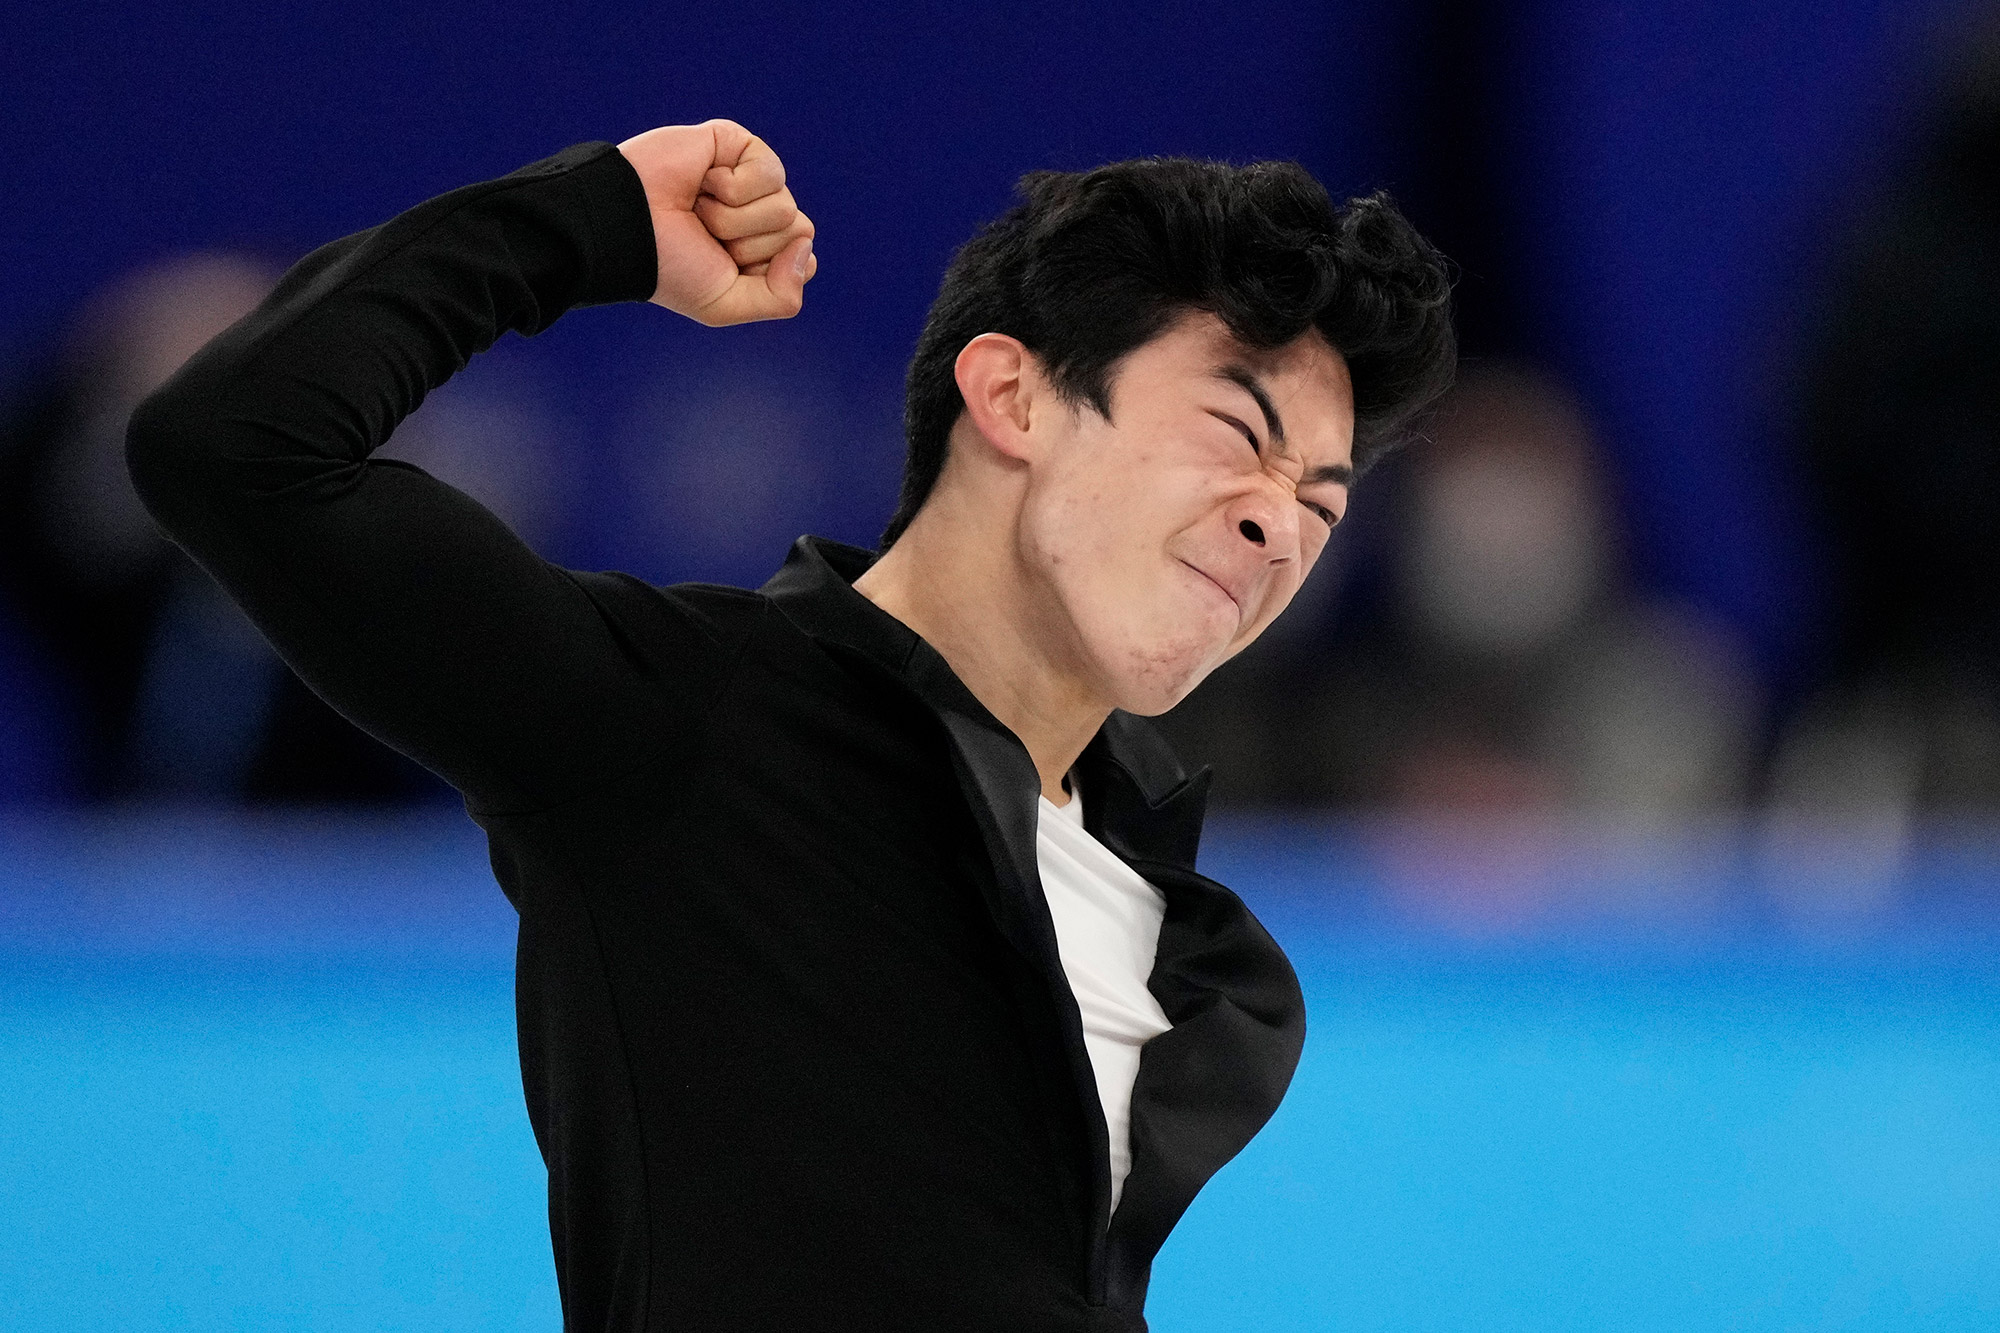 American figure skater Nathan Chen set a new world record in the short program on Tuesday.